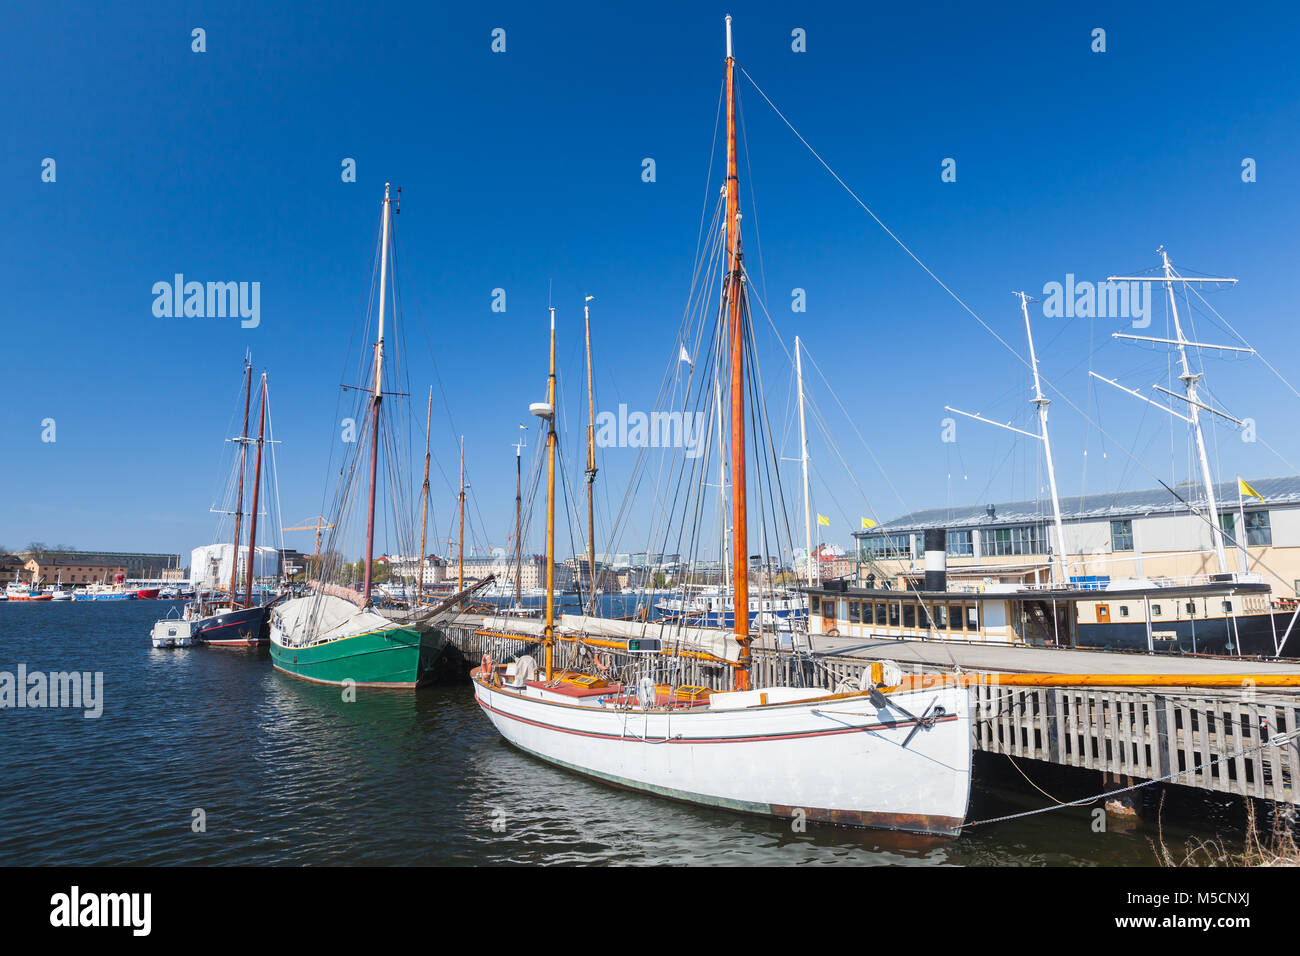 Vintage sailing yachts moored in Stockholm city, Sweden Stock Photo